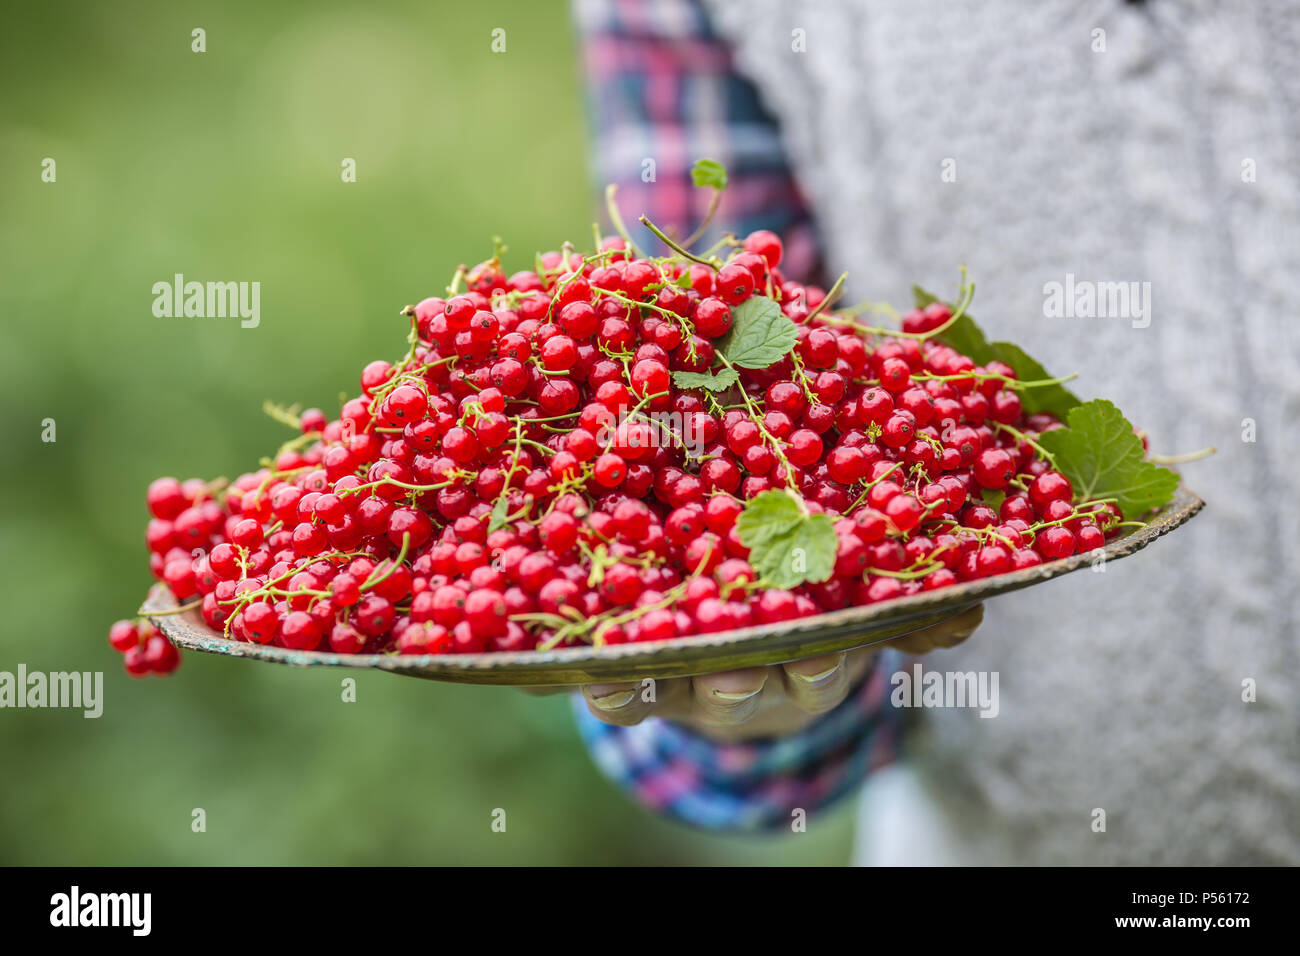 Pensioner farmer in garden holding plate full of red currants. Stock Photo